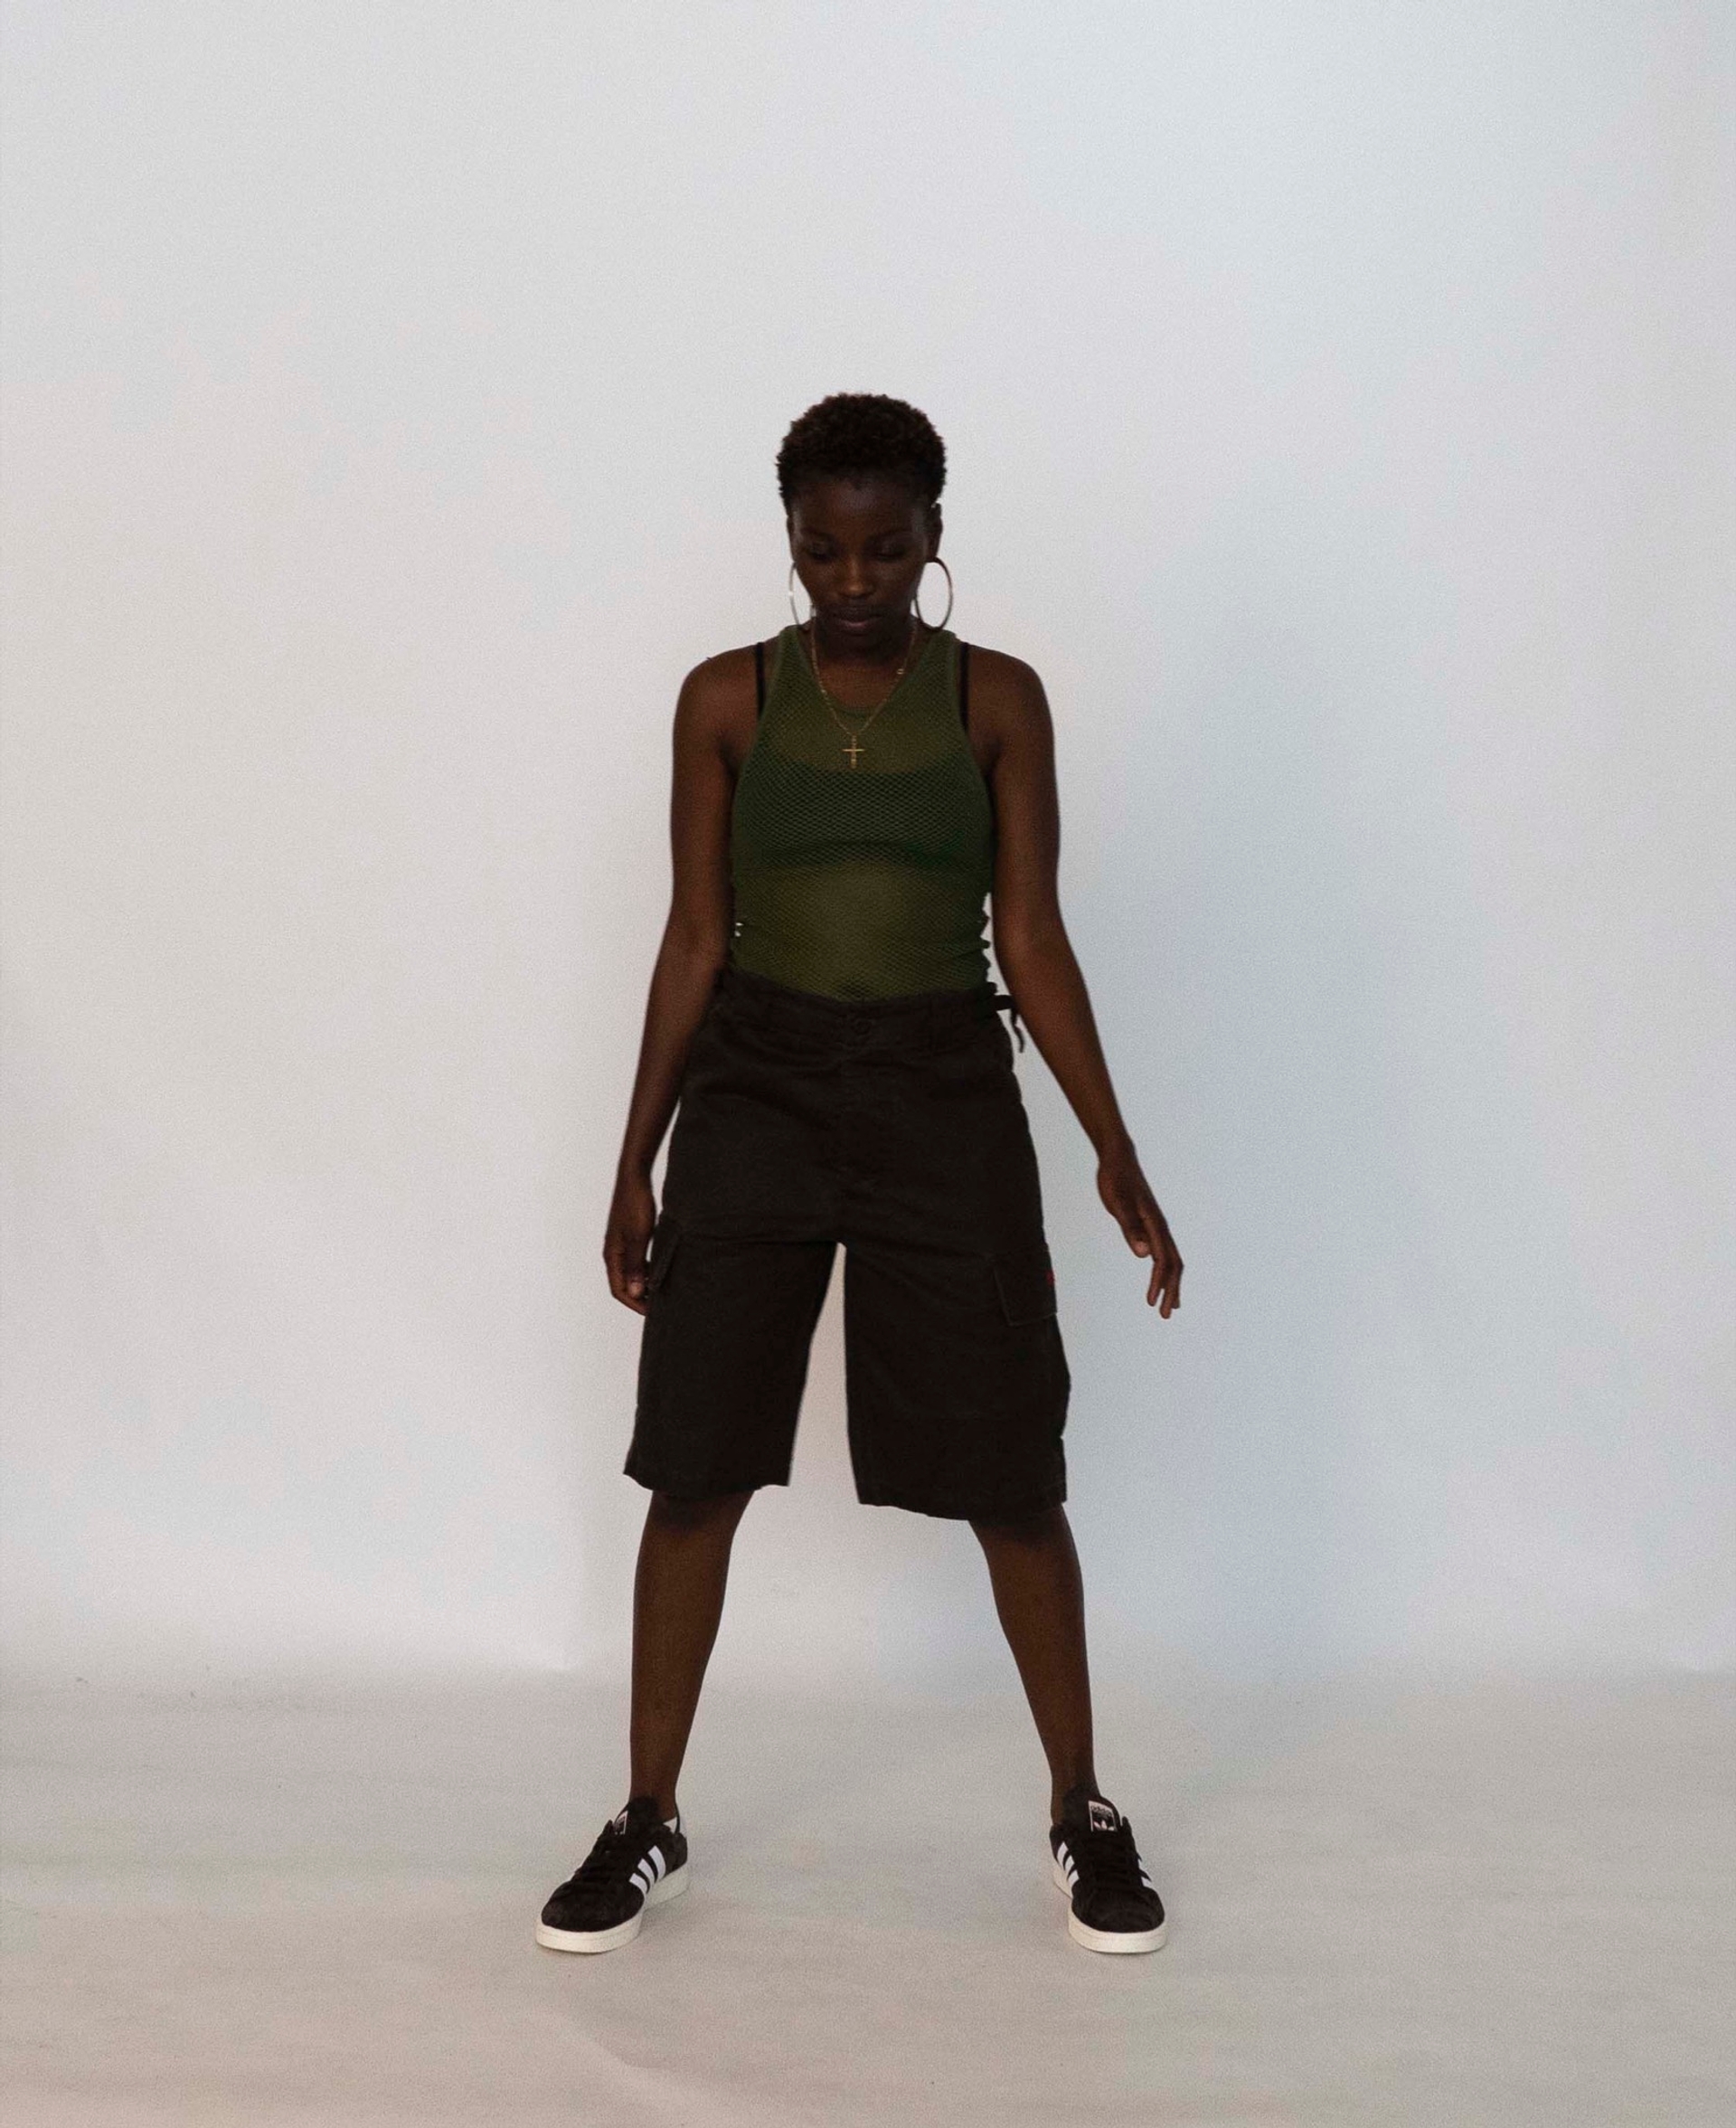 Mariama wears the 032c LoveSexDreams Net Tank in olive with Cargo Shorts